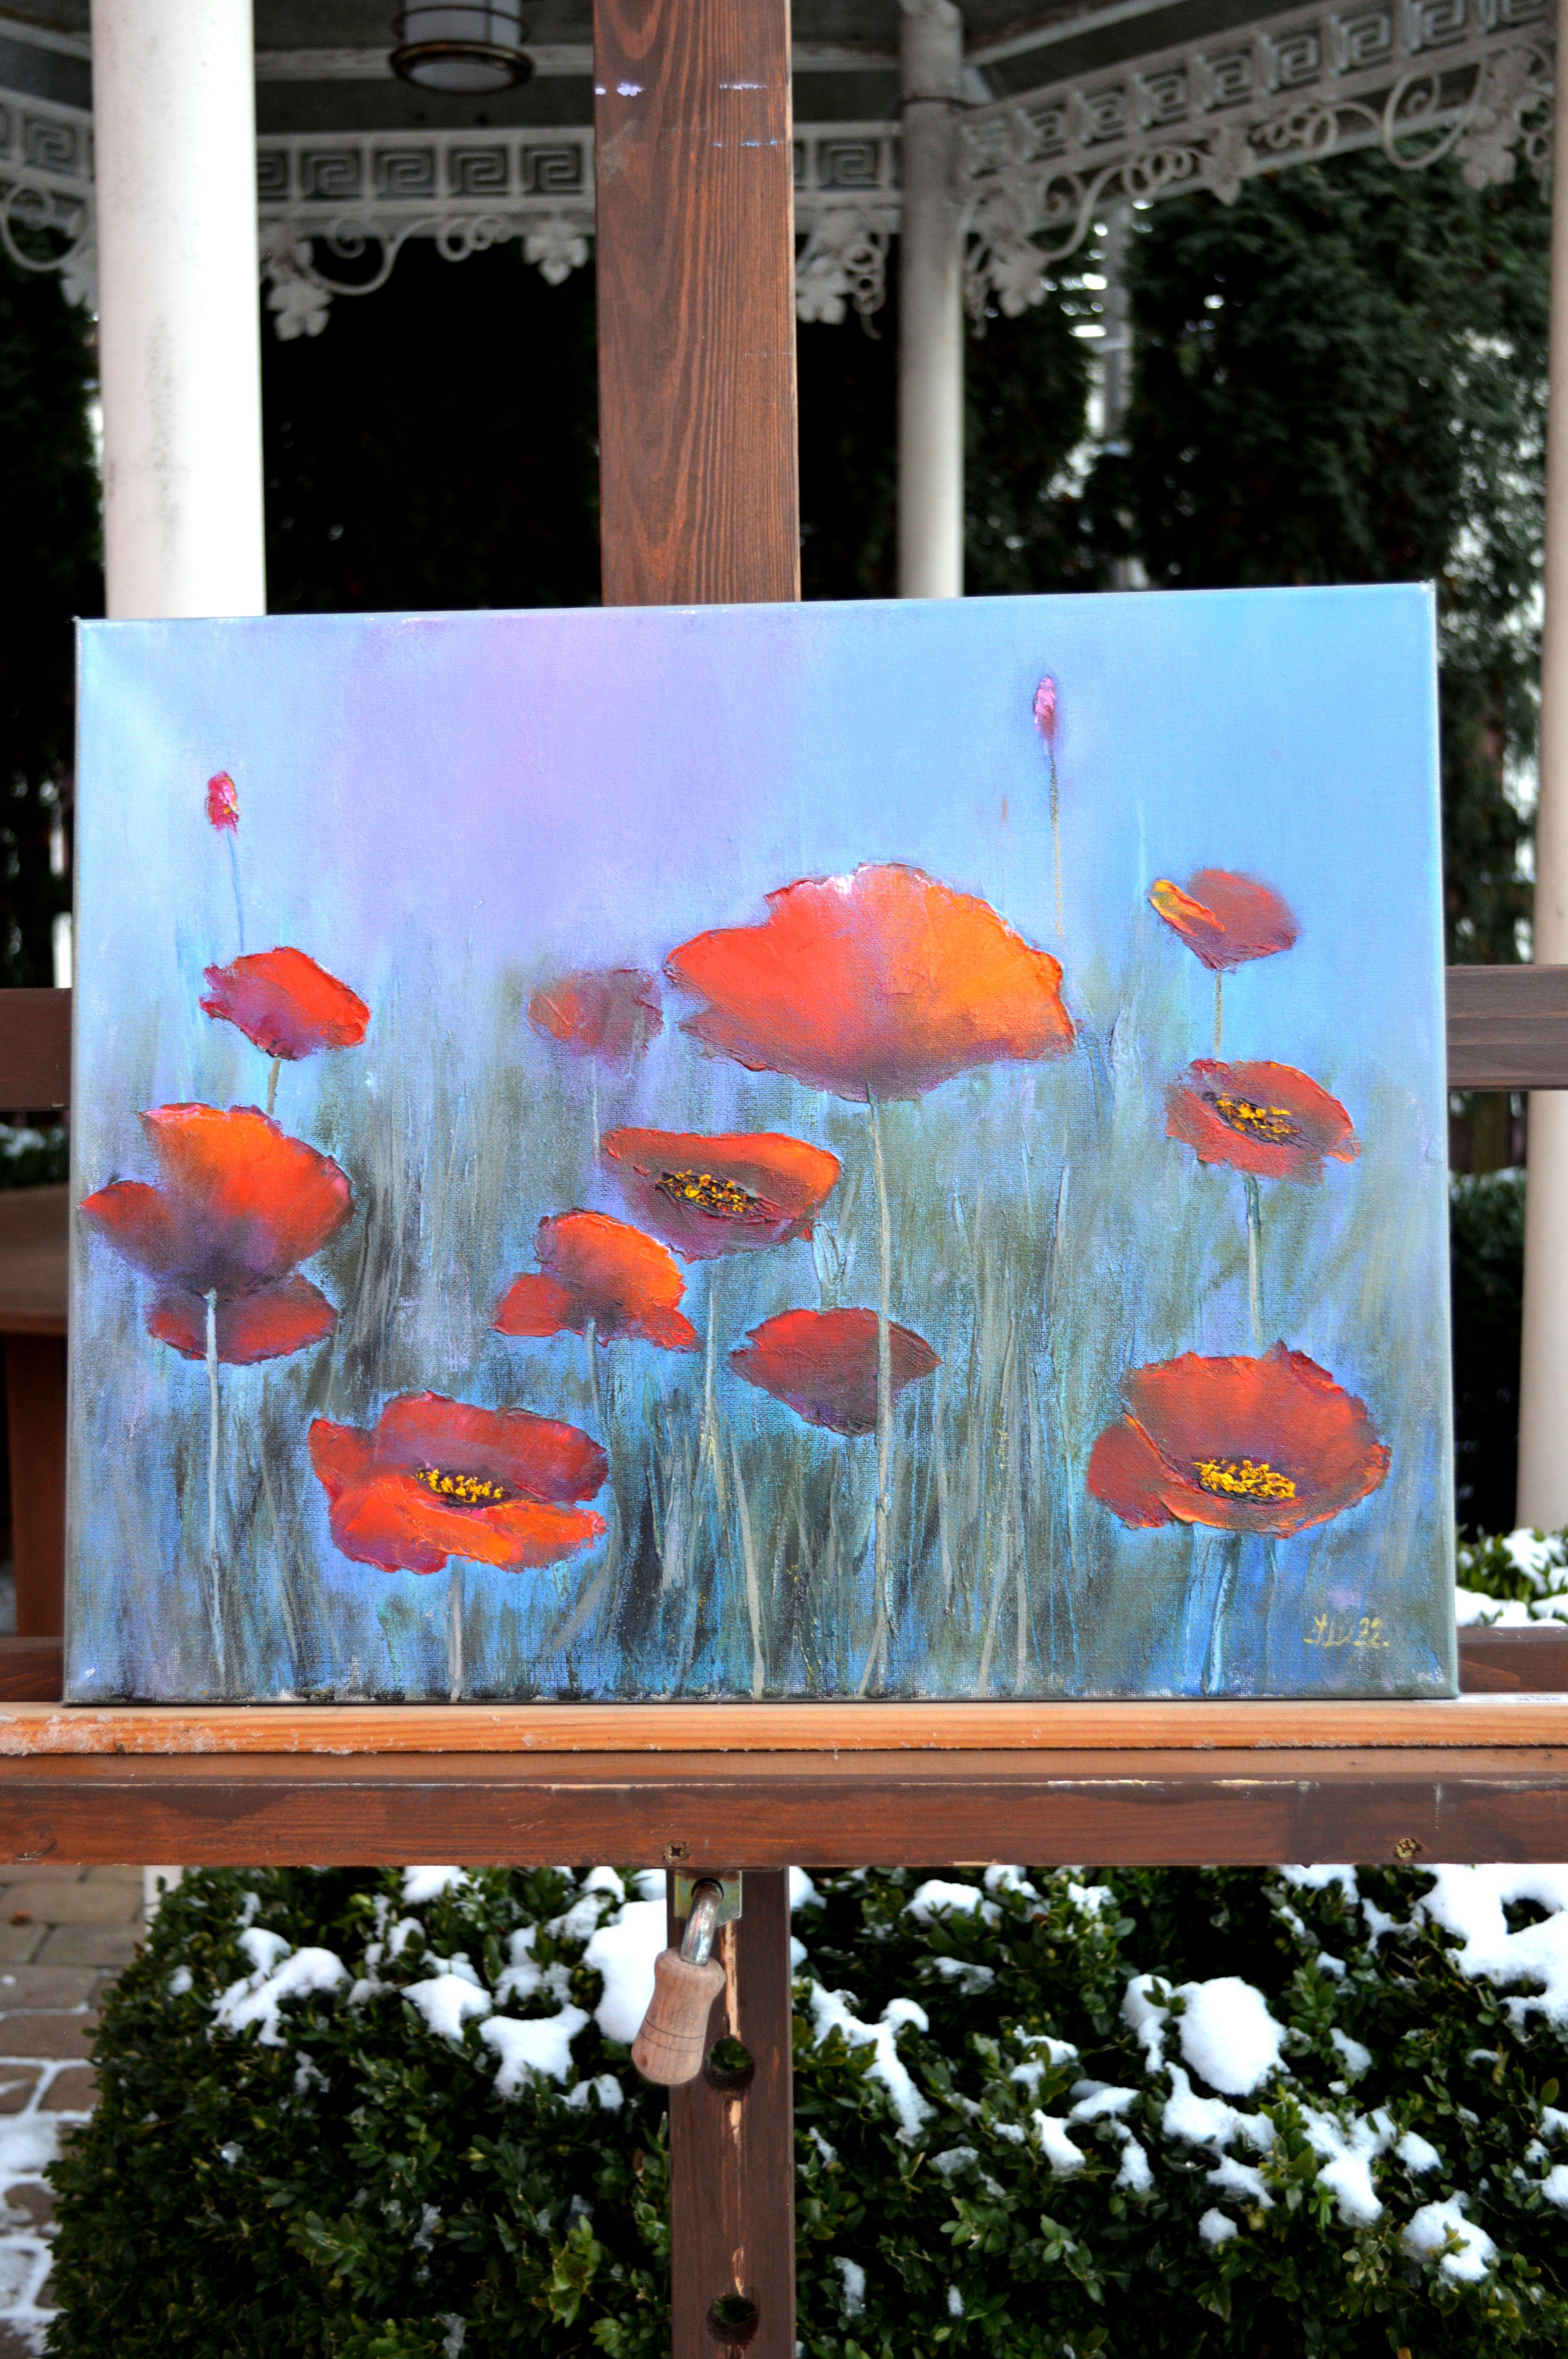 In this creation, I've woven vibrant reds and soothing blues to evoke feelings of mystery and serenity amidst nature's embrace. Each brushstroke celebrates life's ephemeral moments, inviting viewers to lose themselves in the gentle sway of poppies